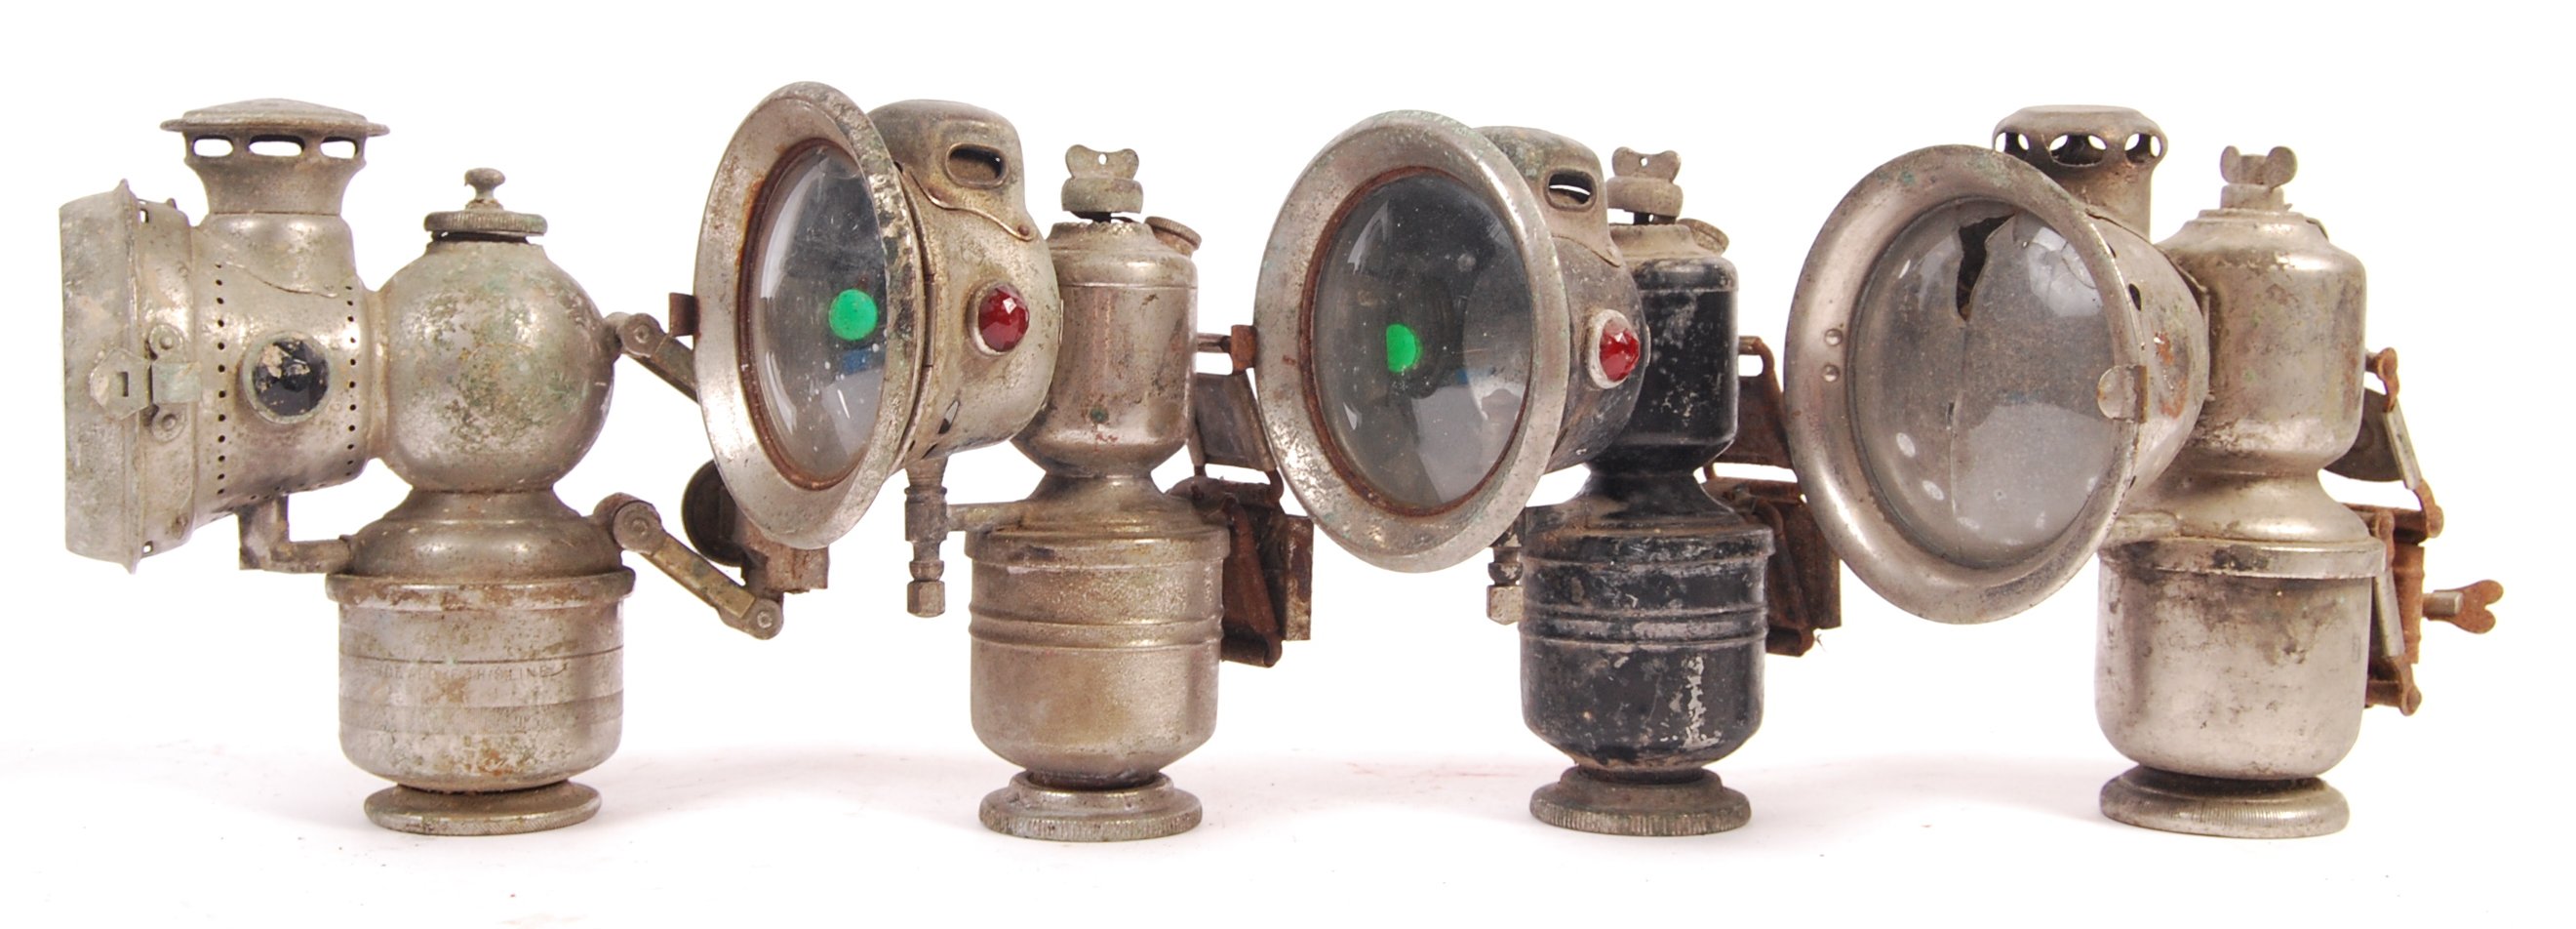 ASSORTED EARLY 20TH CENTURY VINTAGE CARBIDE MOTORCYCLE LAMPS